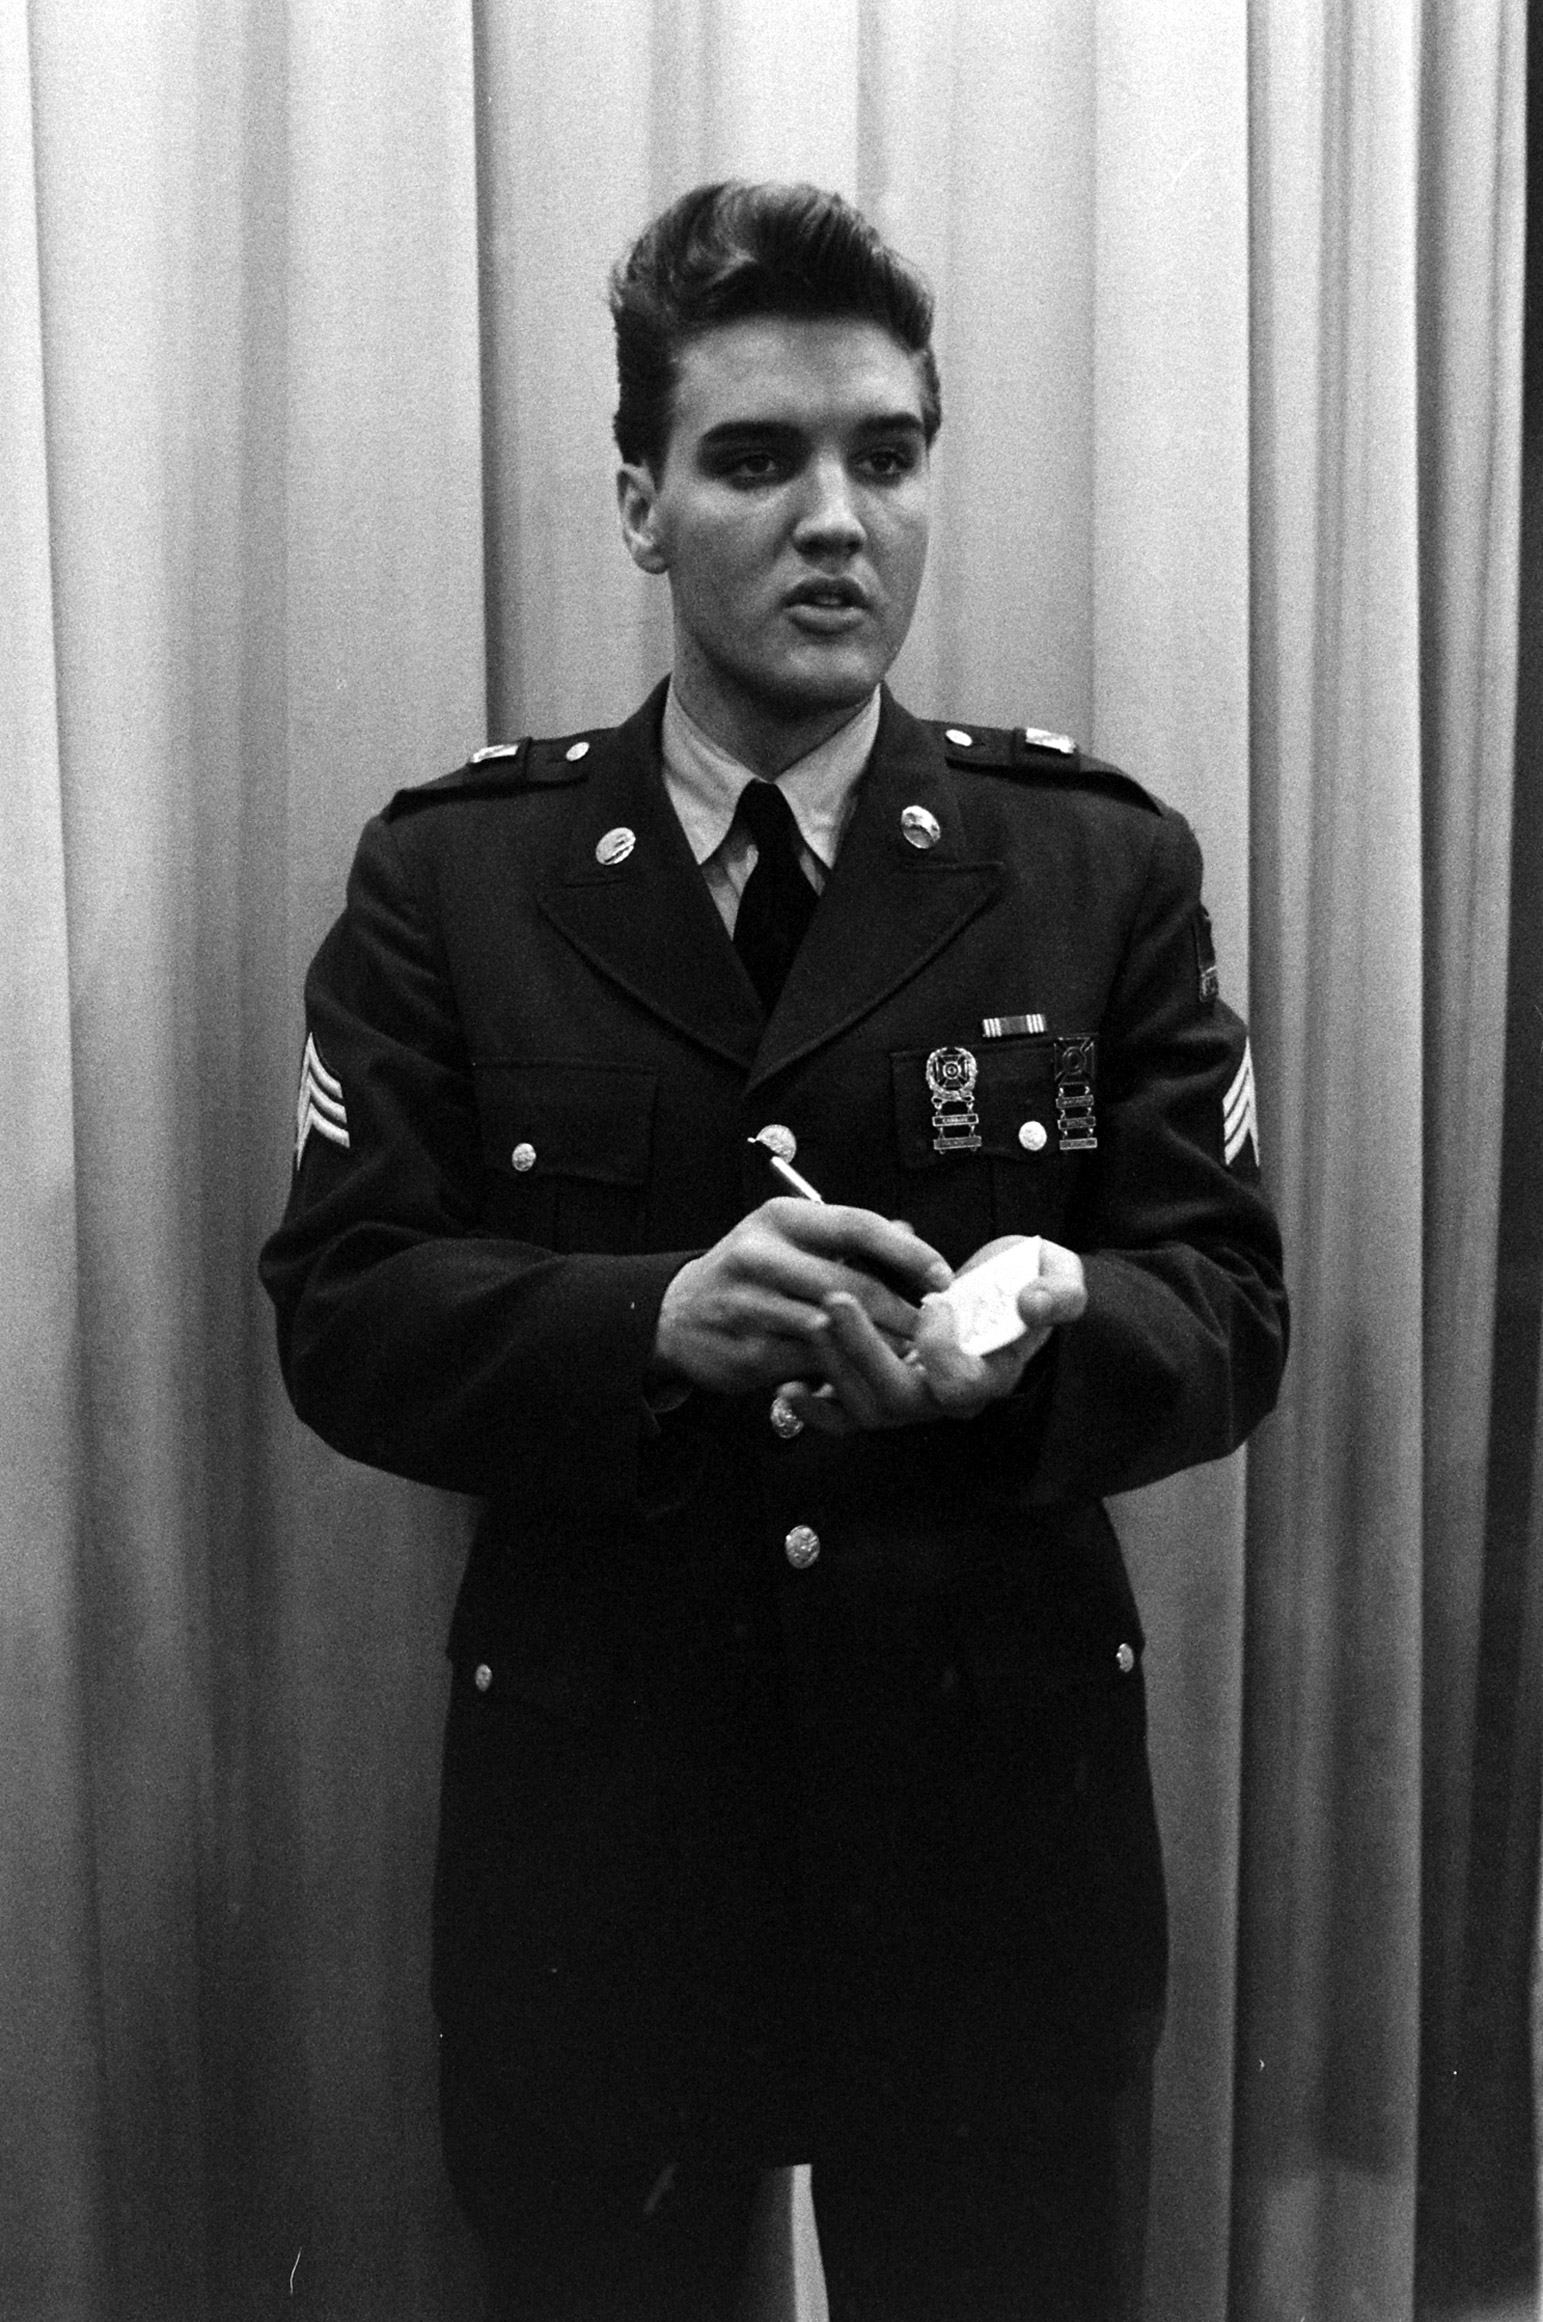 Elvis Presley at Fort Dix, New Jersey, shortly before his discharge from the U.S. Army.